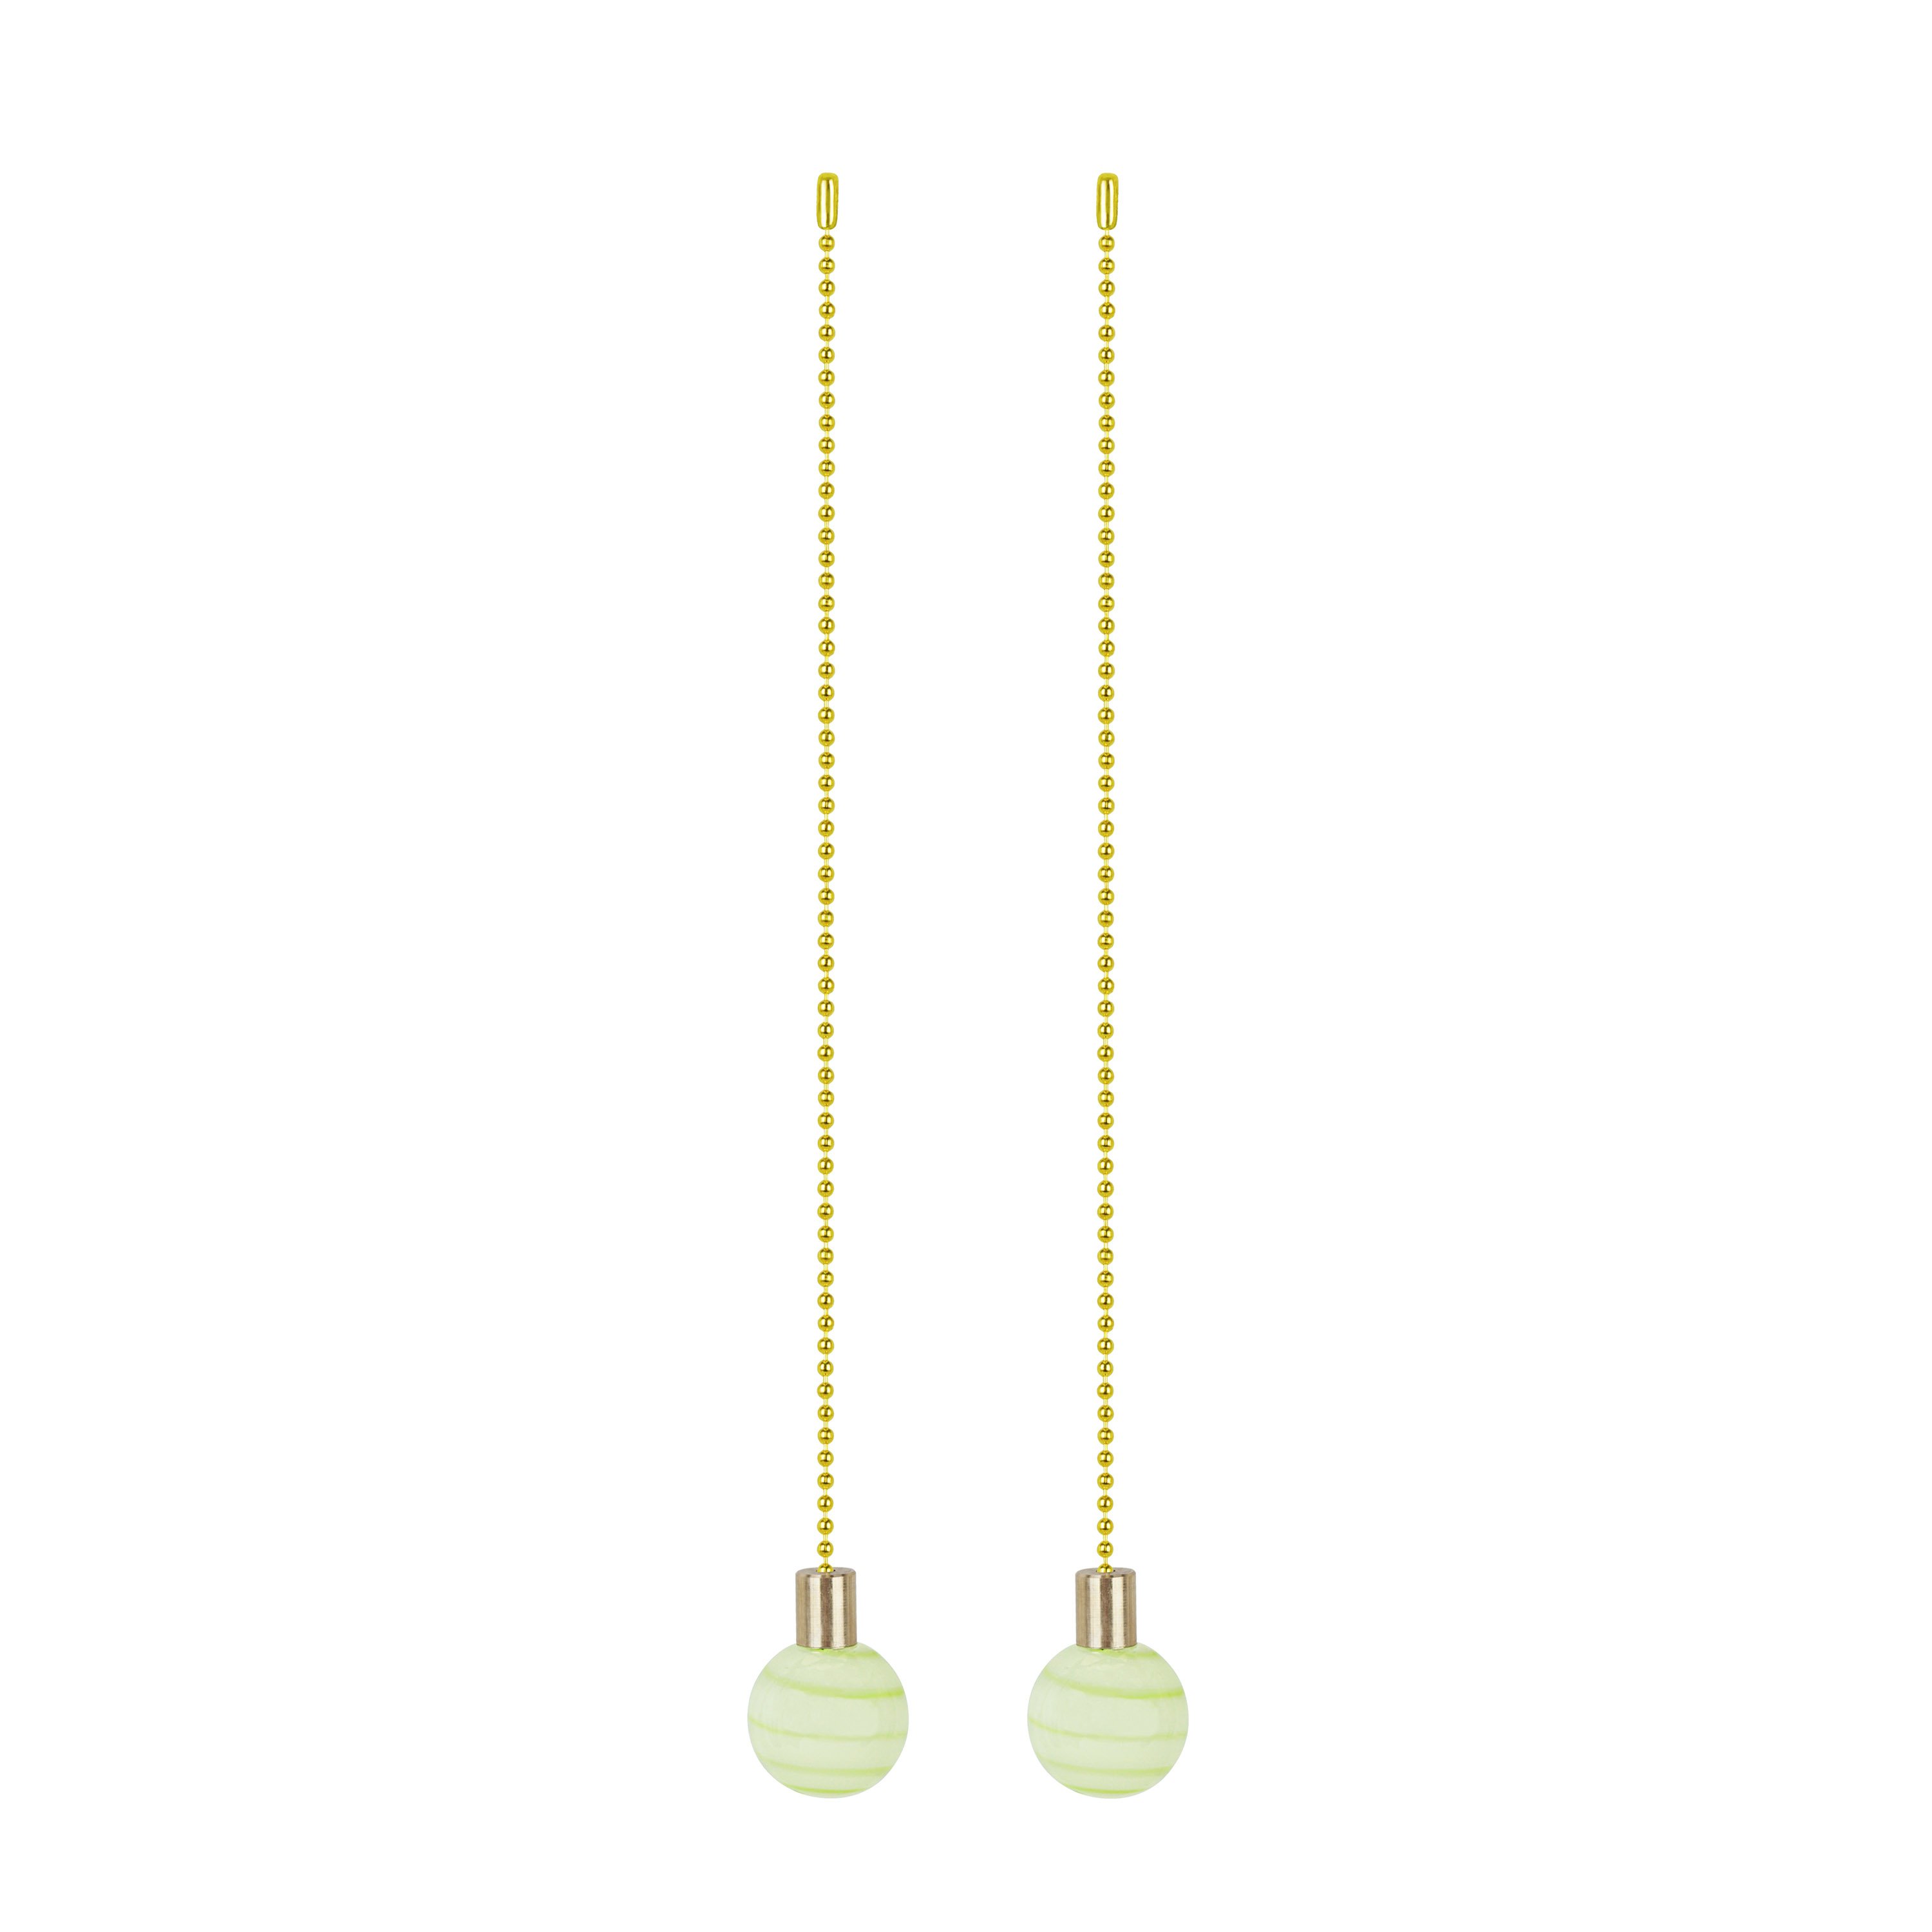 Aspen Creative 20510-22, 12" Light Green with Green Grain Glass Knob with Pull Chain in Copper, 2 Pack - image 1 of 8